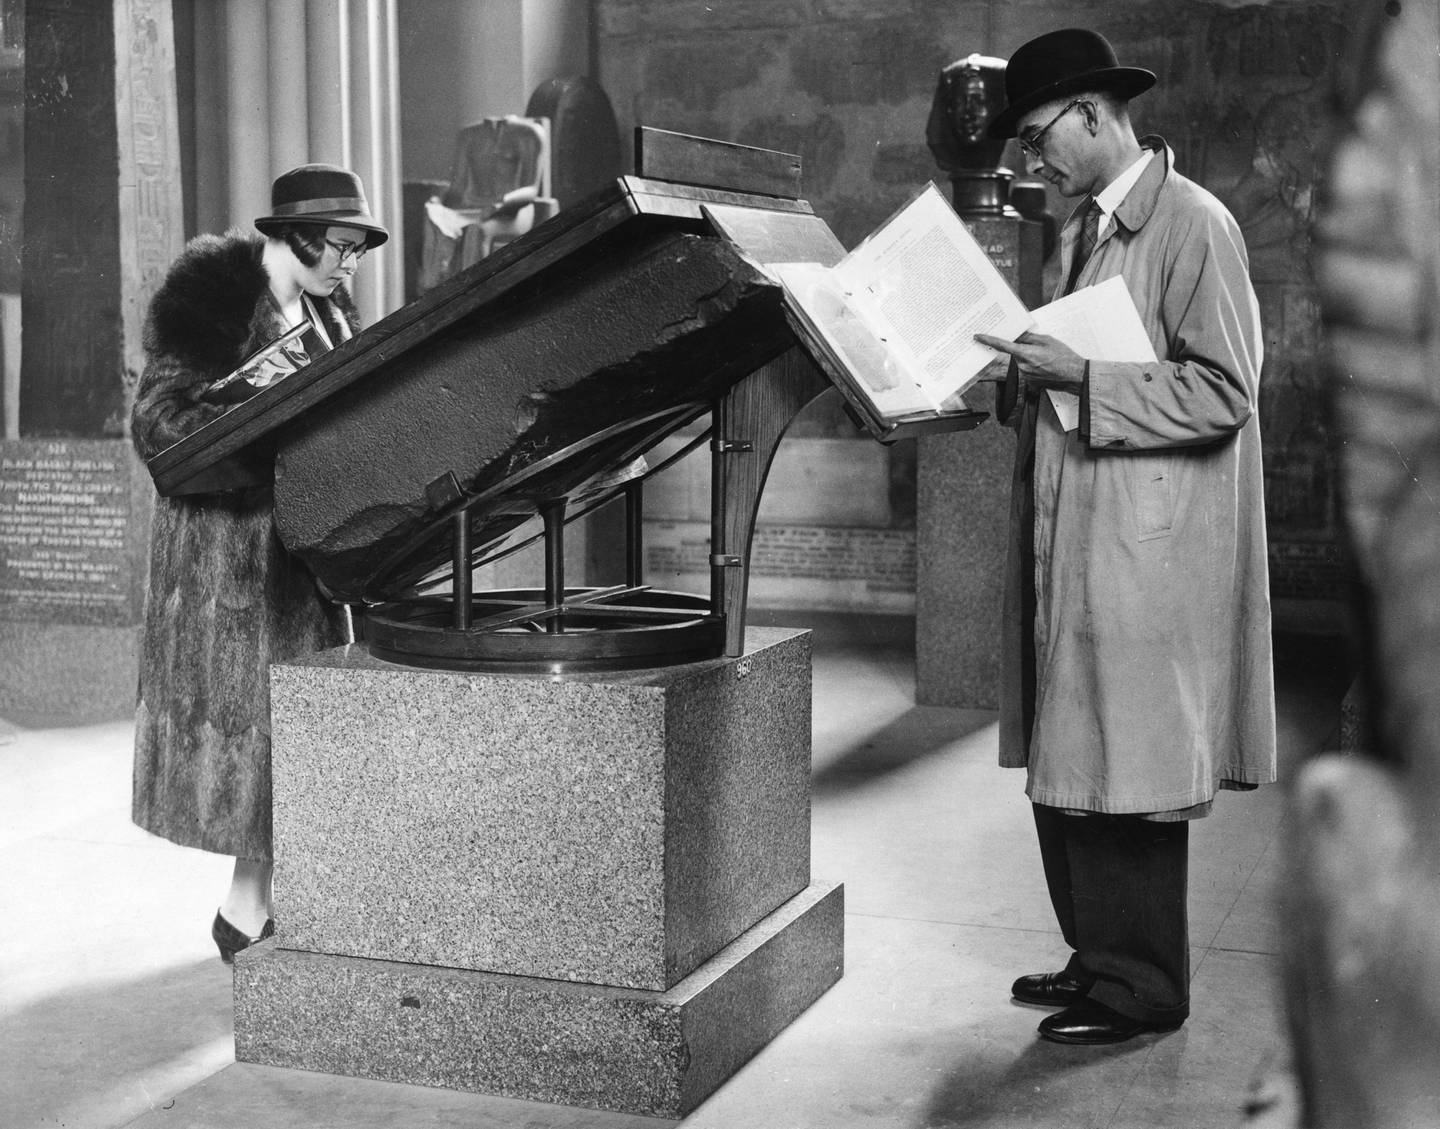 14th September 1932:  Visitors reading information concerning the Rosetta Stone, from the top of the Stone itself, in the Egyptian Gallery at the British Museum.  (Photo by Fox Photos/Getty Images)